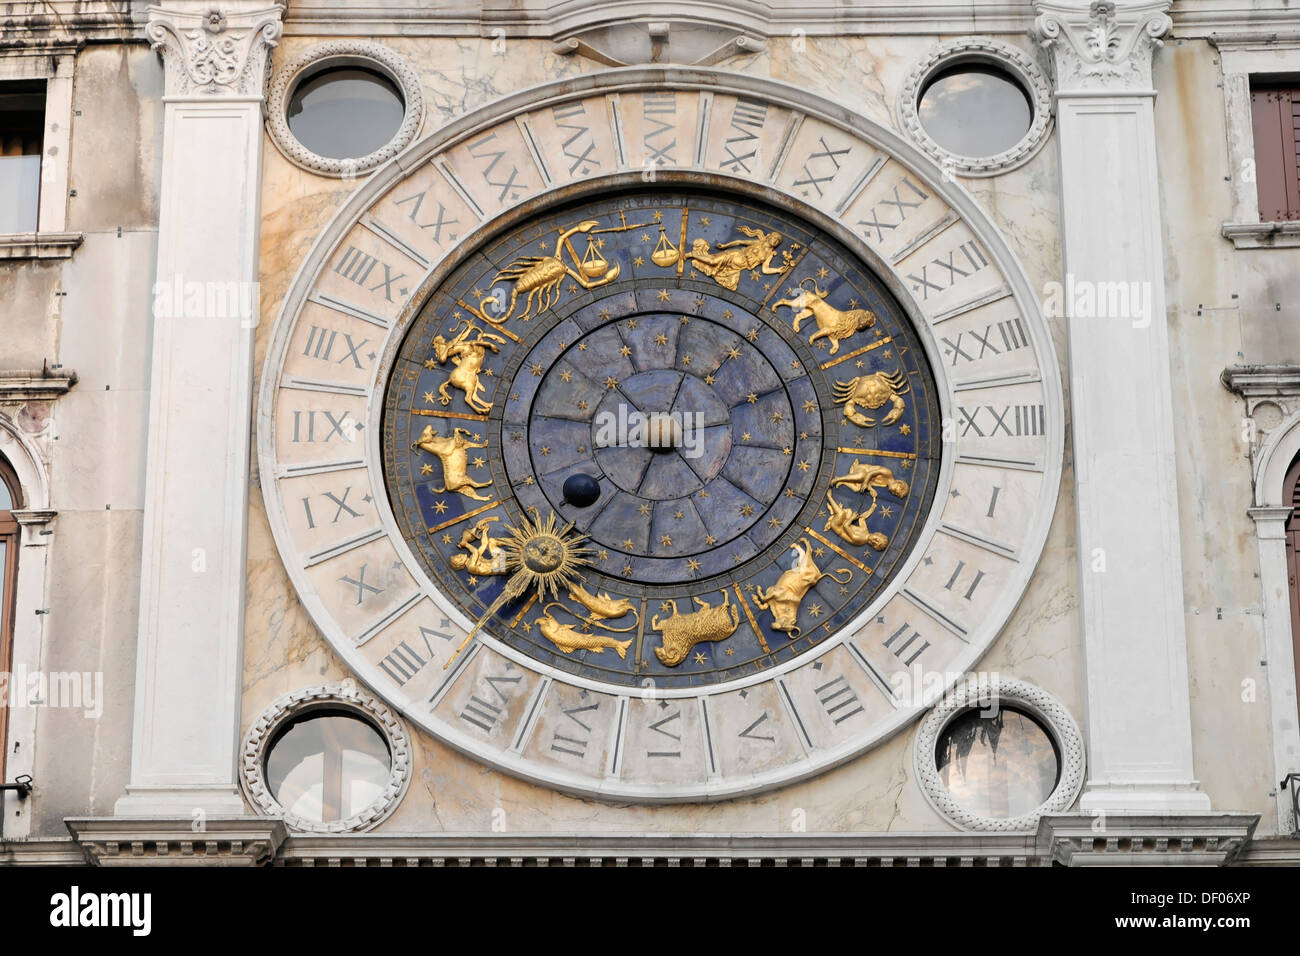 Sundial with zodiacal signs, St Mark's Basilica, St. Mark's Square, Venice, Italy, Europe Stock Photo